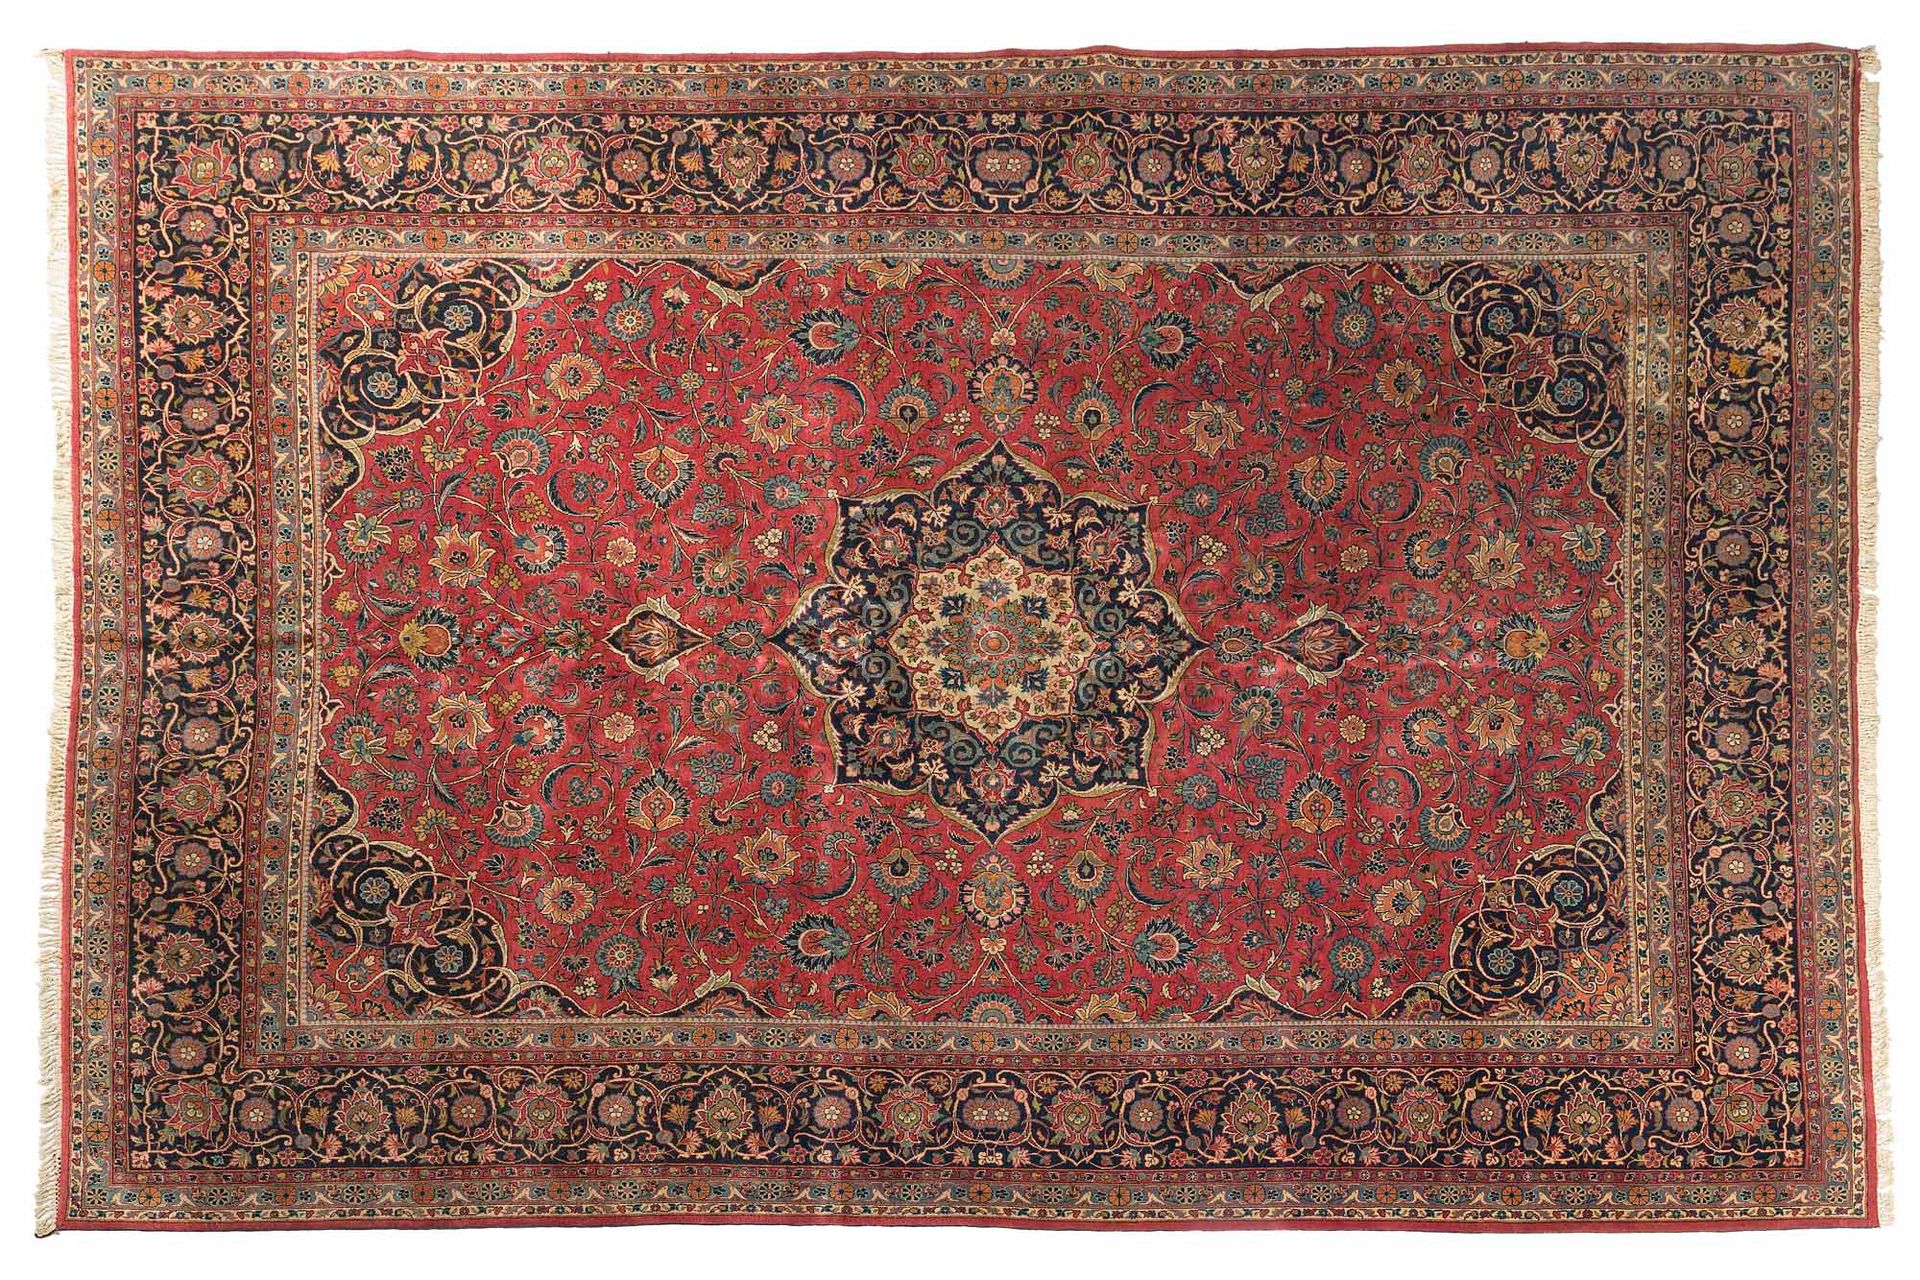 Null KACHAN carpet (Iran), 2nd third of the 20th century

Dimensions : 380 x 280&hellip;